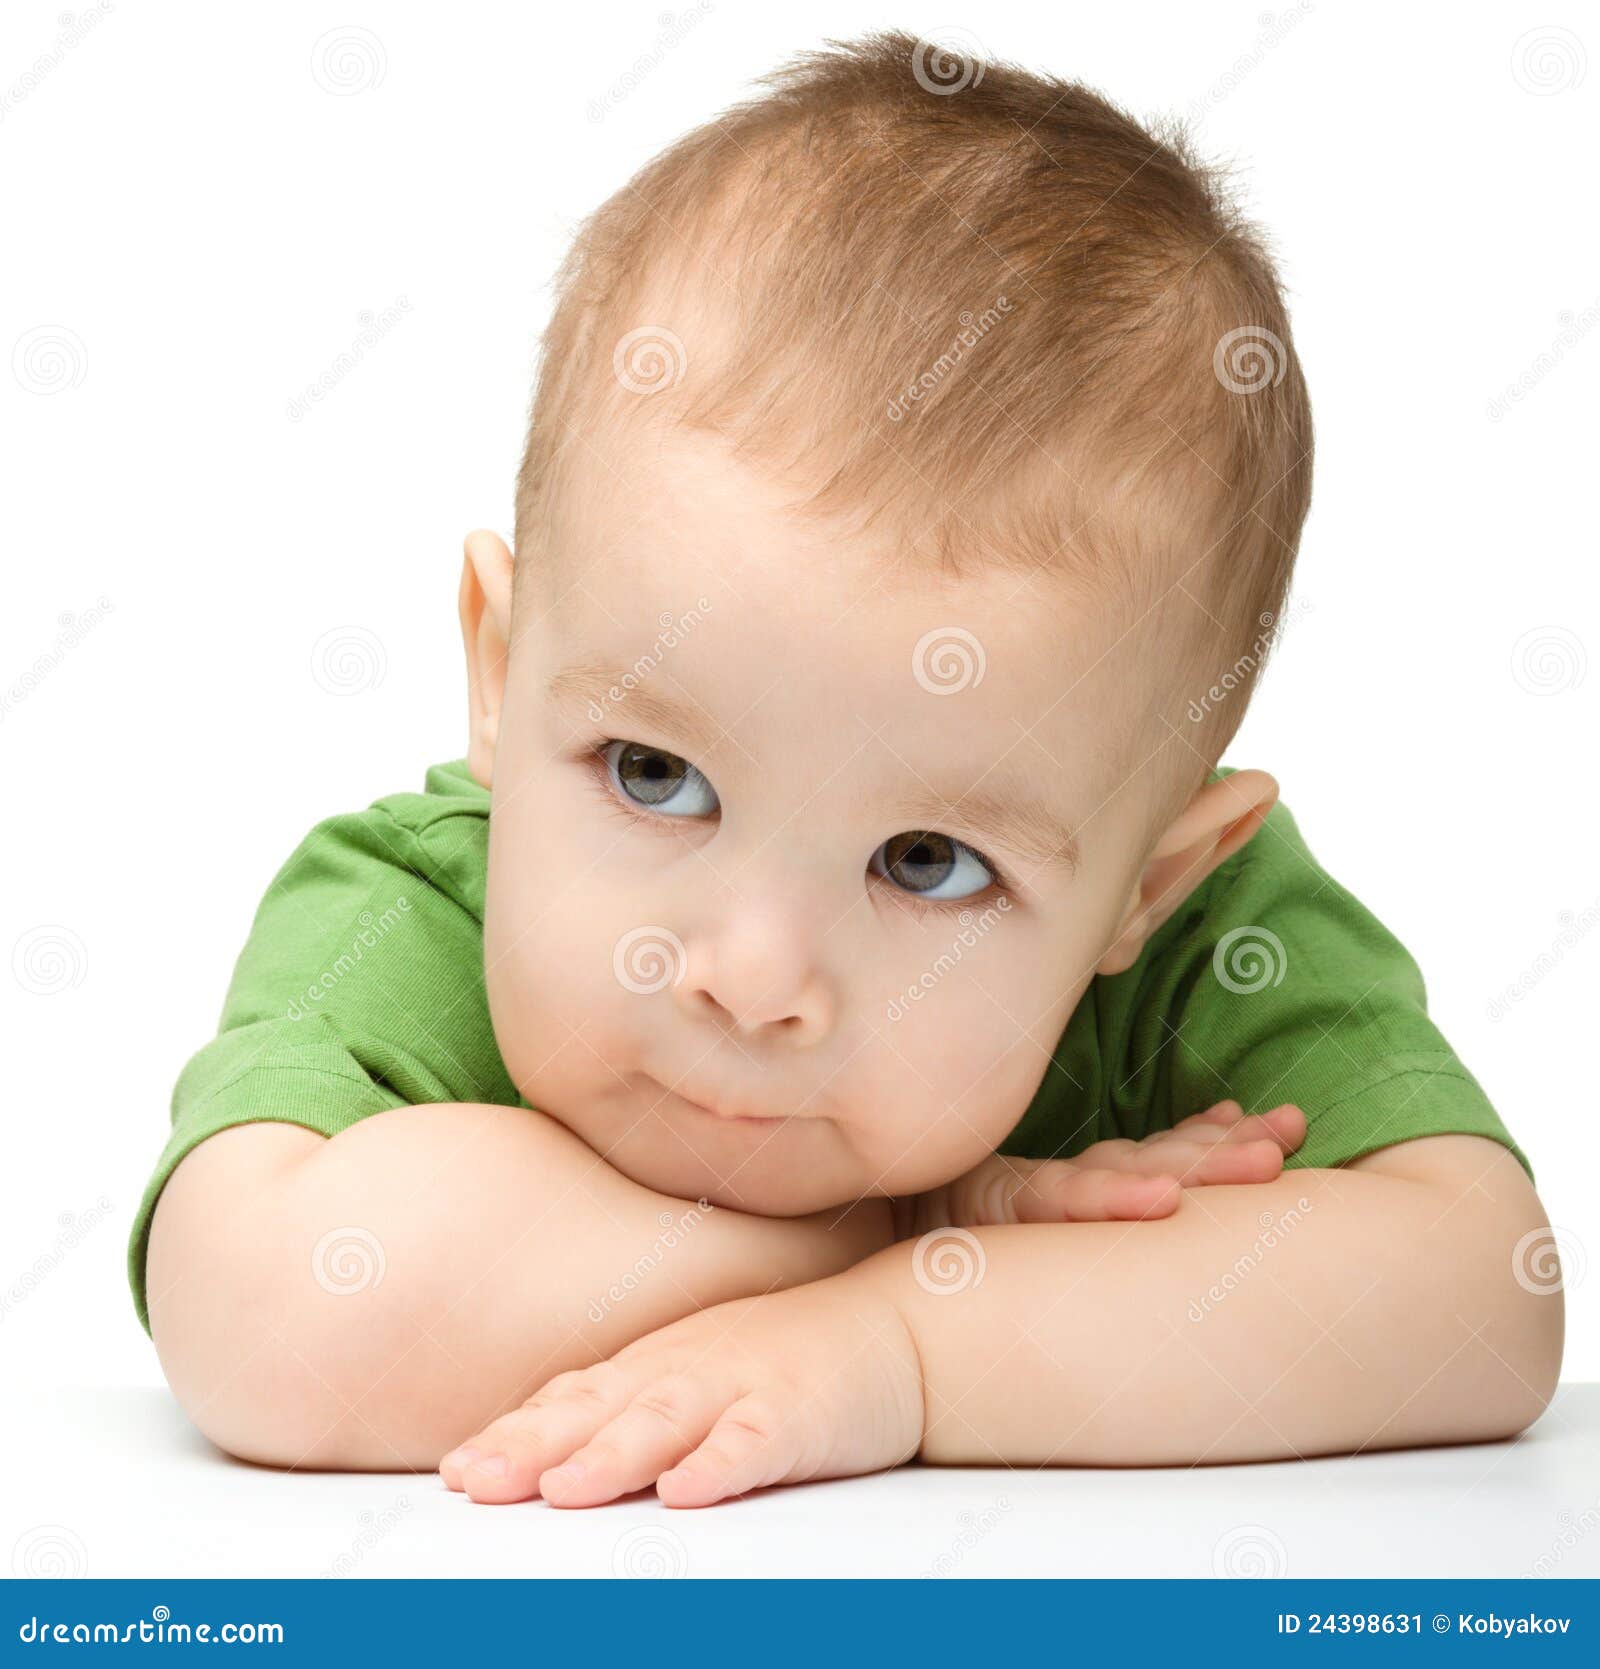 Pensive Little Boy Support His Head with Hands Stock Image - Image of ...